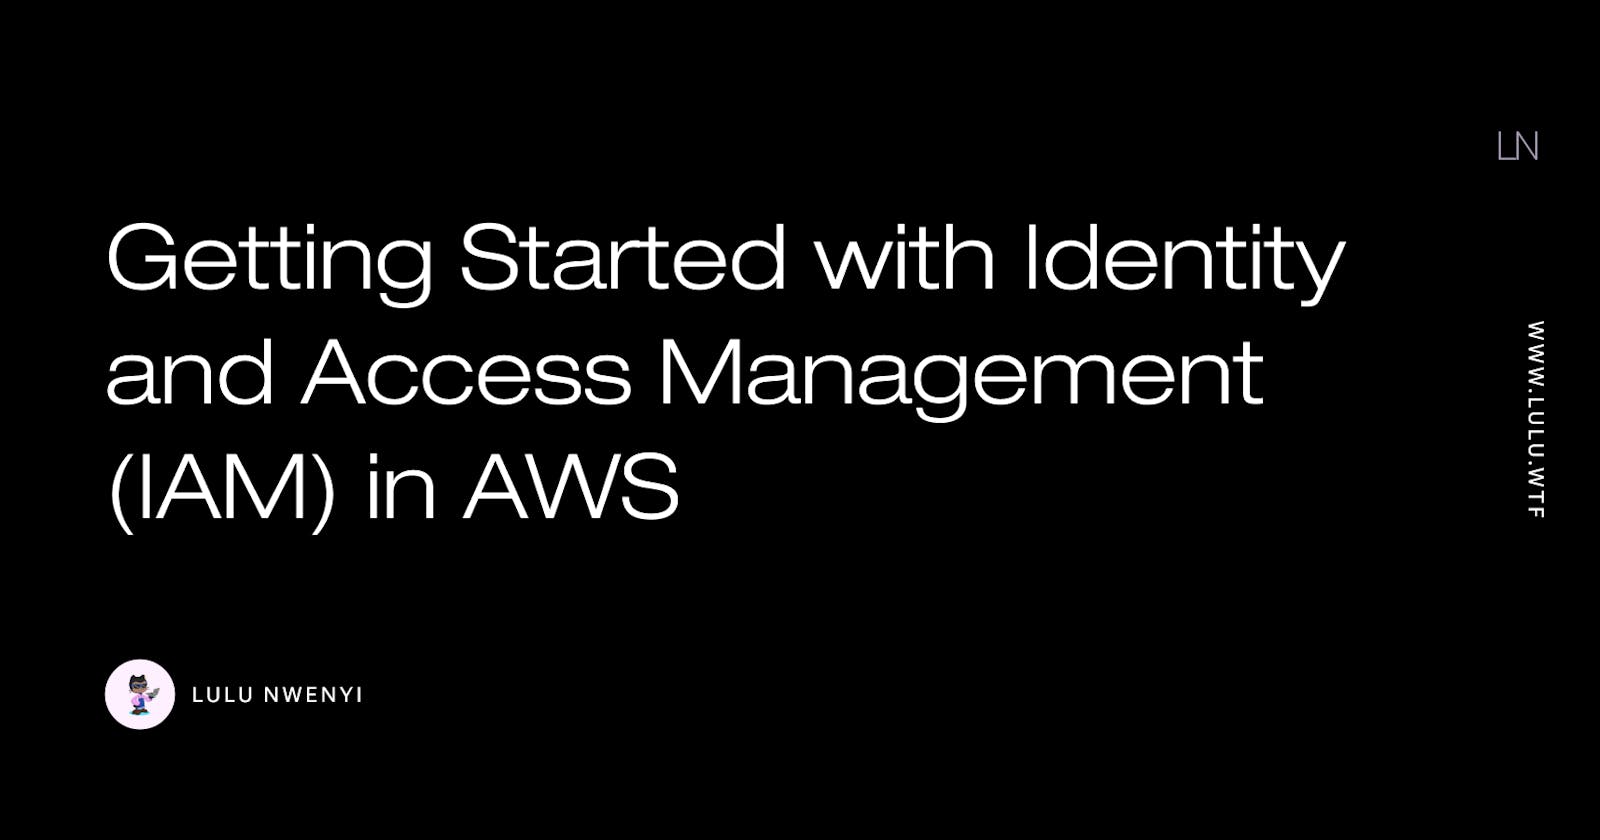 Getting Started with Identity and Access Management (IAM) in AWS